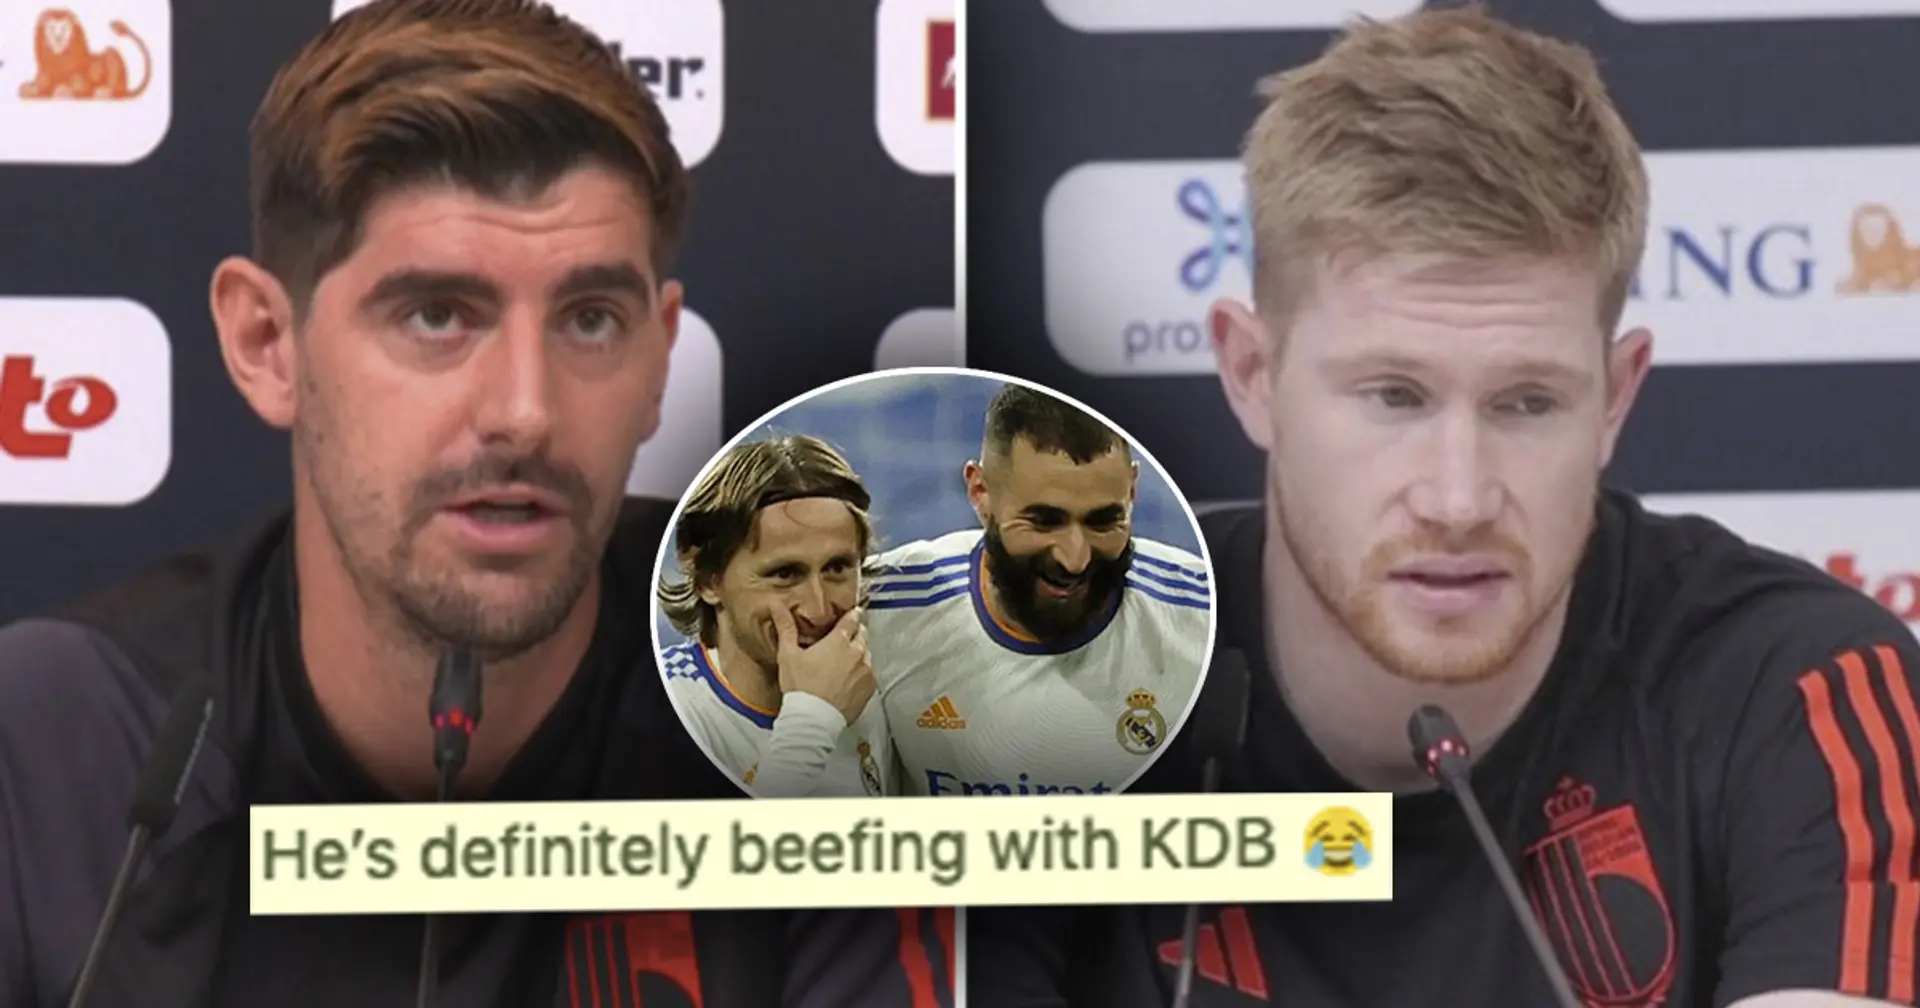 'It's easy to make excuses': Courtois and De Bruyne seemingly in conflict over Kevin's 'we're too old' claim